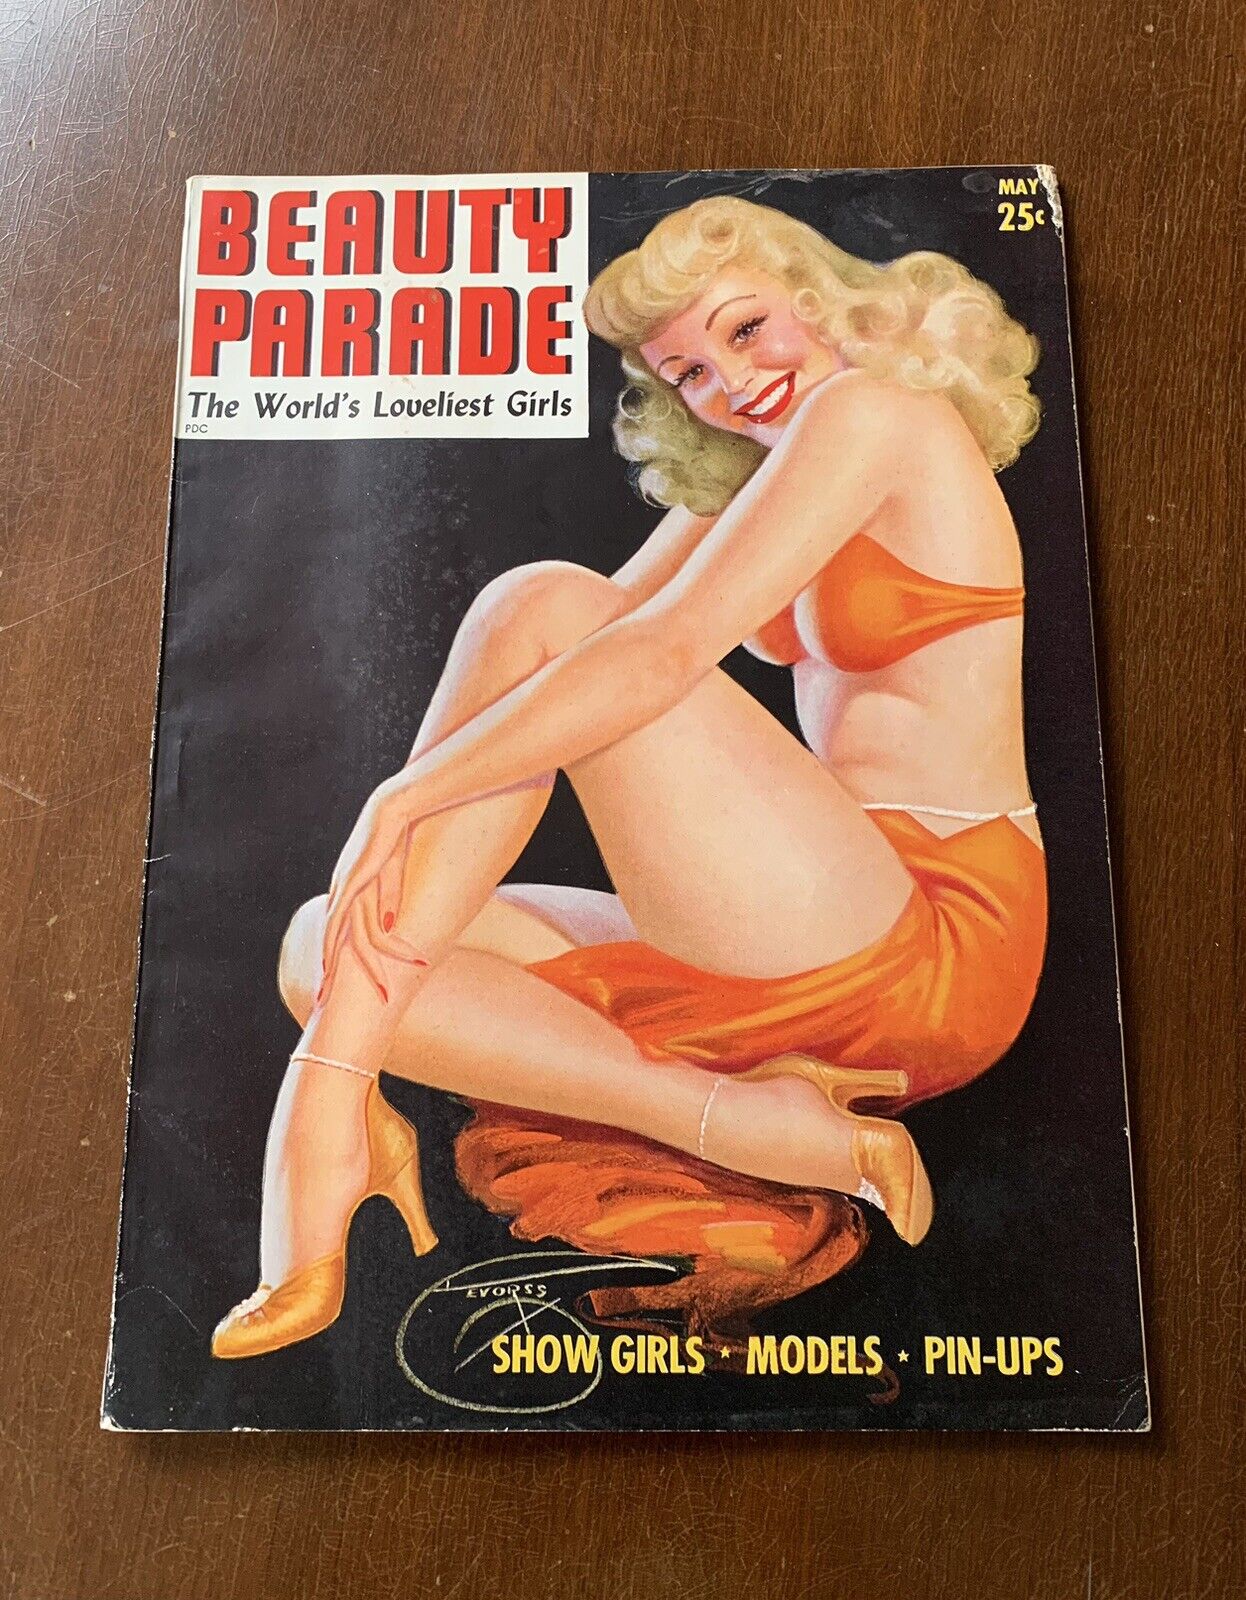 Beauty Parade Magazine May 1944 Vol 3 #3 VG+ DeVorss Cover Pinups Spicy Pulp